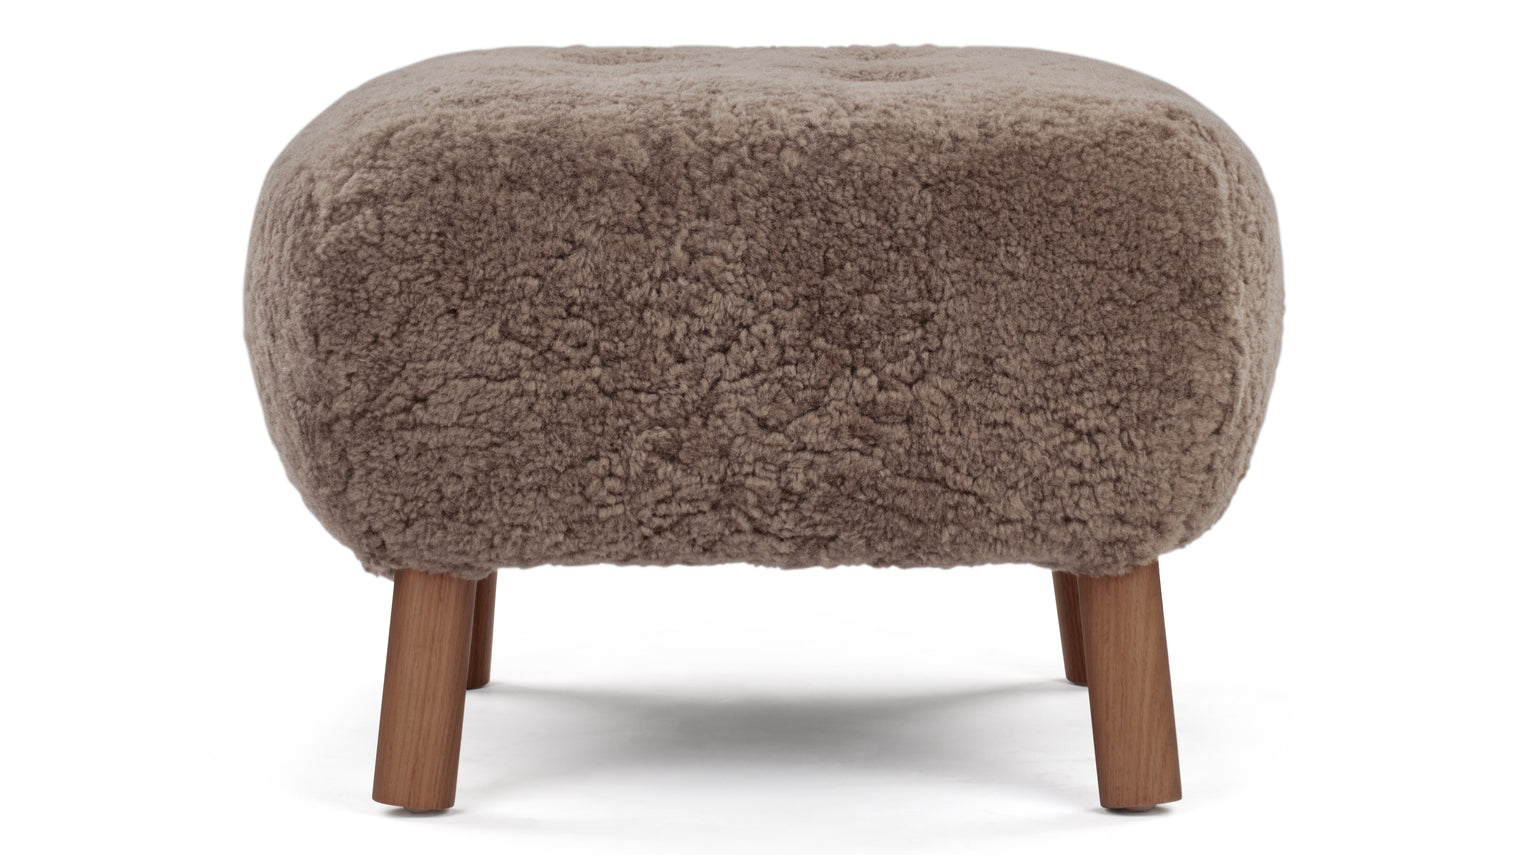 A PETITE COMPANION | Designed to complement the Petra Lounge Chair, the Petra Ottoman adds comfort and style to the cosy yet sophisticated chair. Not to be overshadowed by its predecessor, the stool is quite lovely and versatile on its own. It can be utilized as a traditional footstool or ottoman, and it’s also ideal for extra seating.
